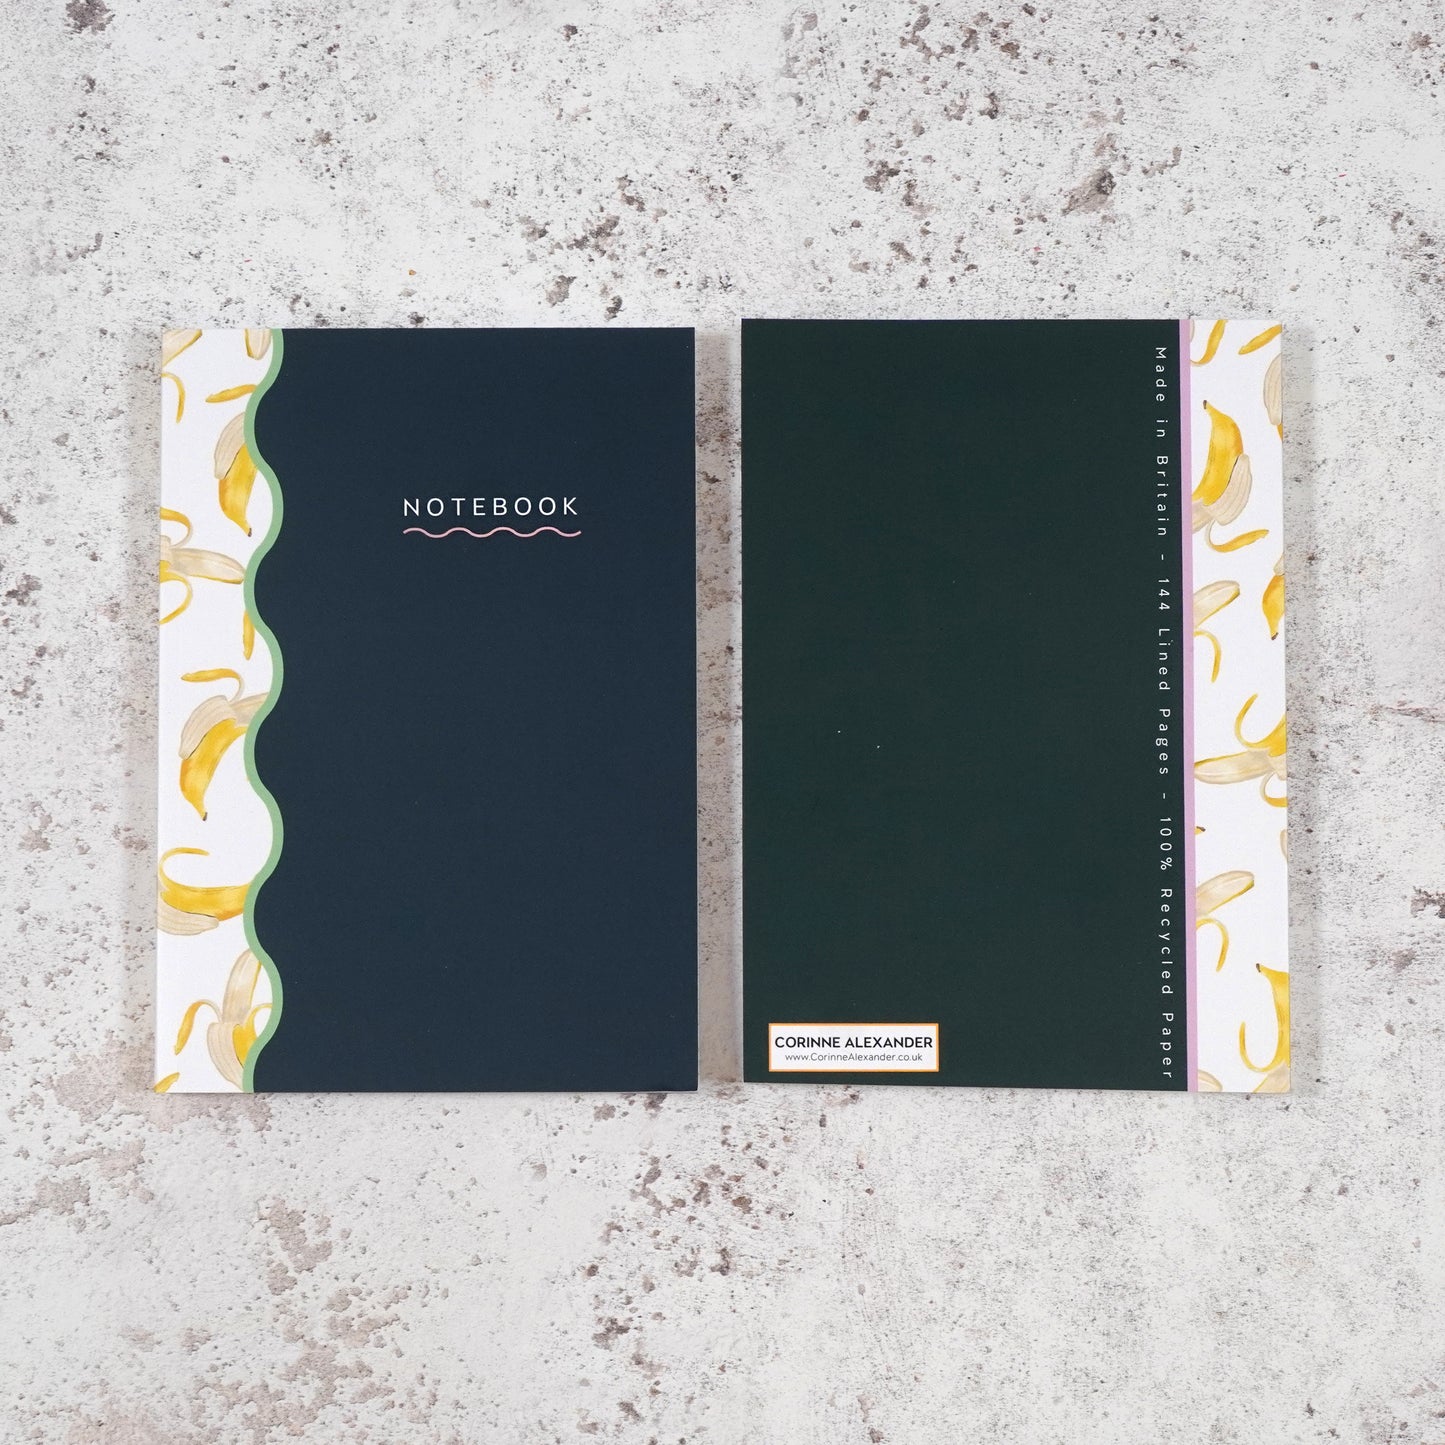 Banana Notebook - recycled paper